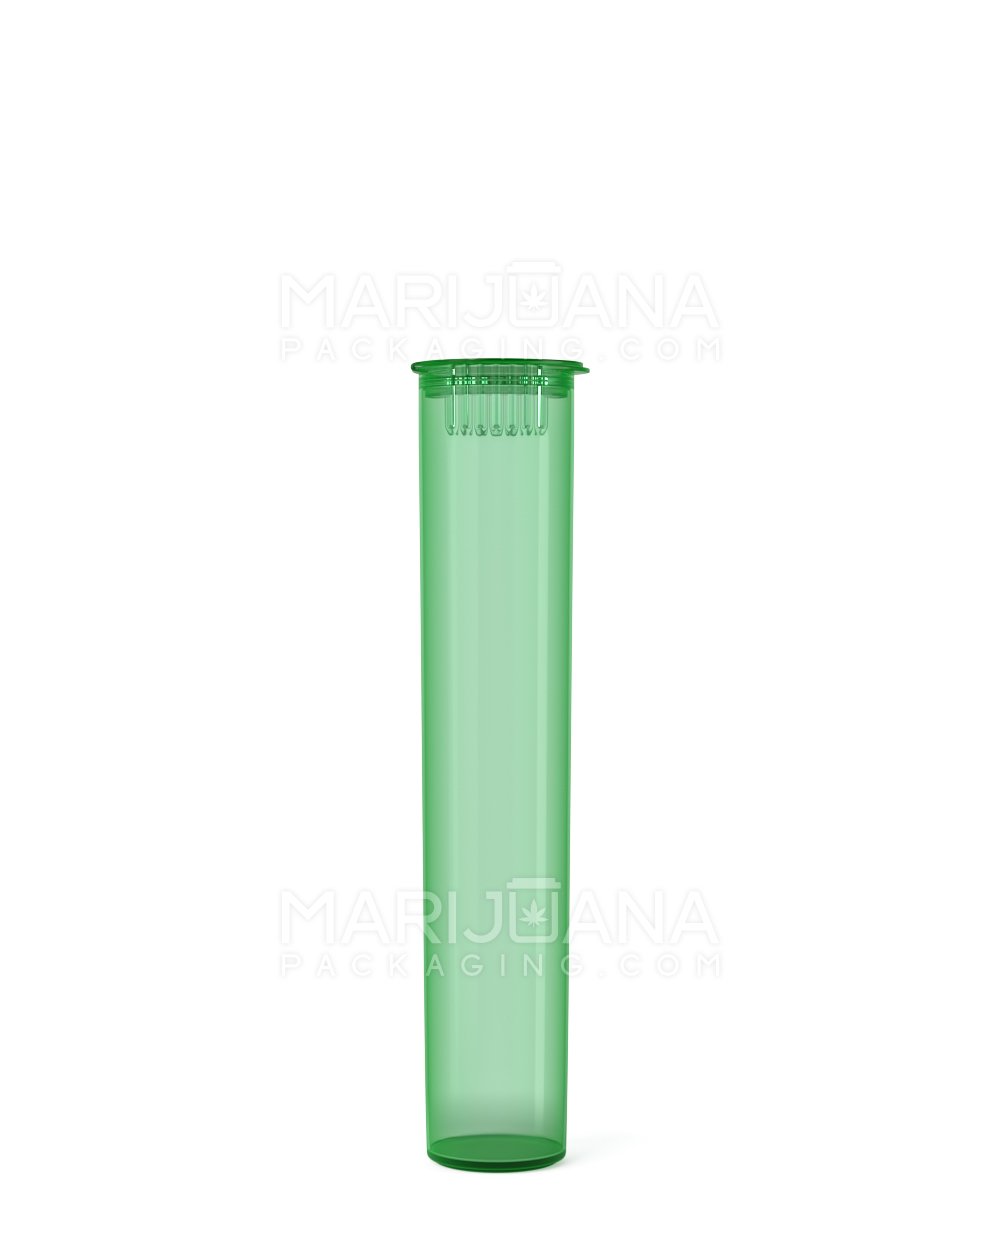 Child Resistant | Pop Top Translucent Plastic Pre-Roll Tubes | 95mm - Green - 1000 Count - 2